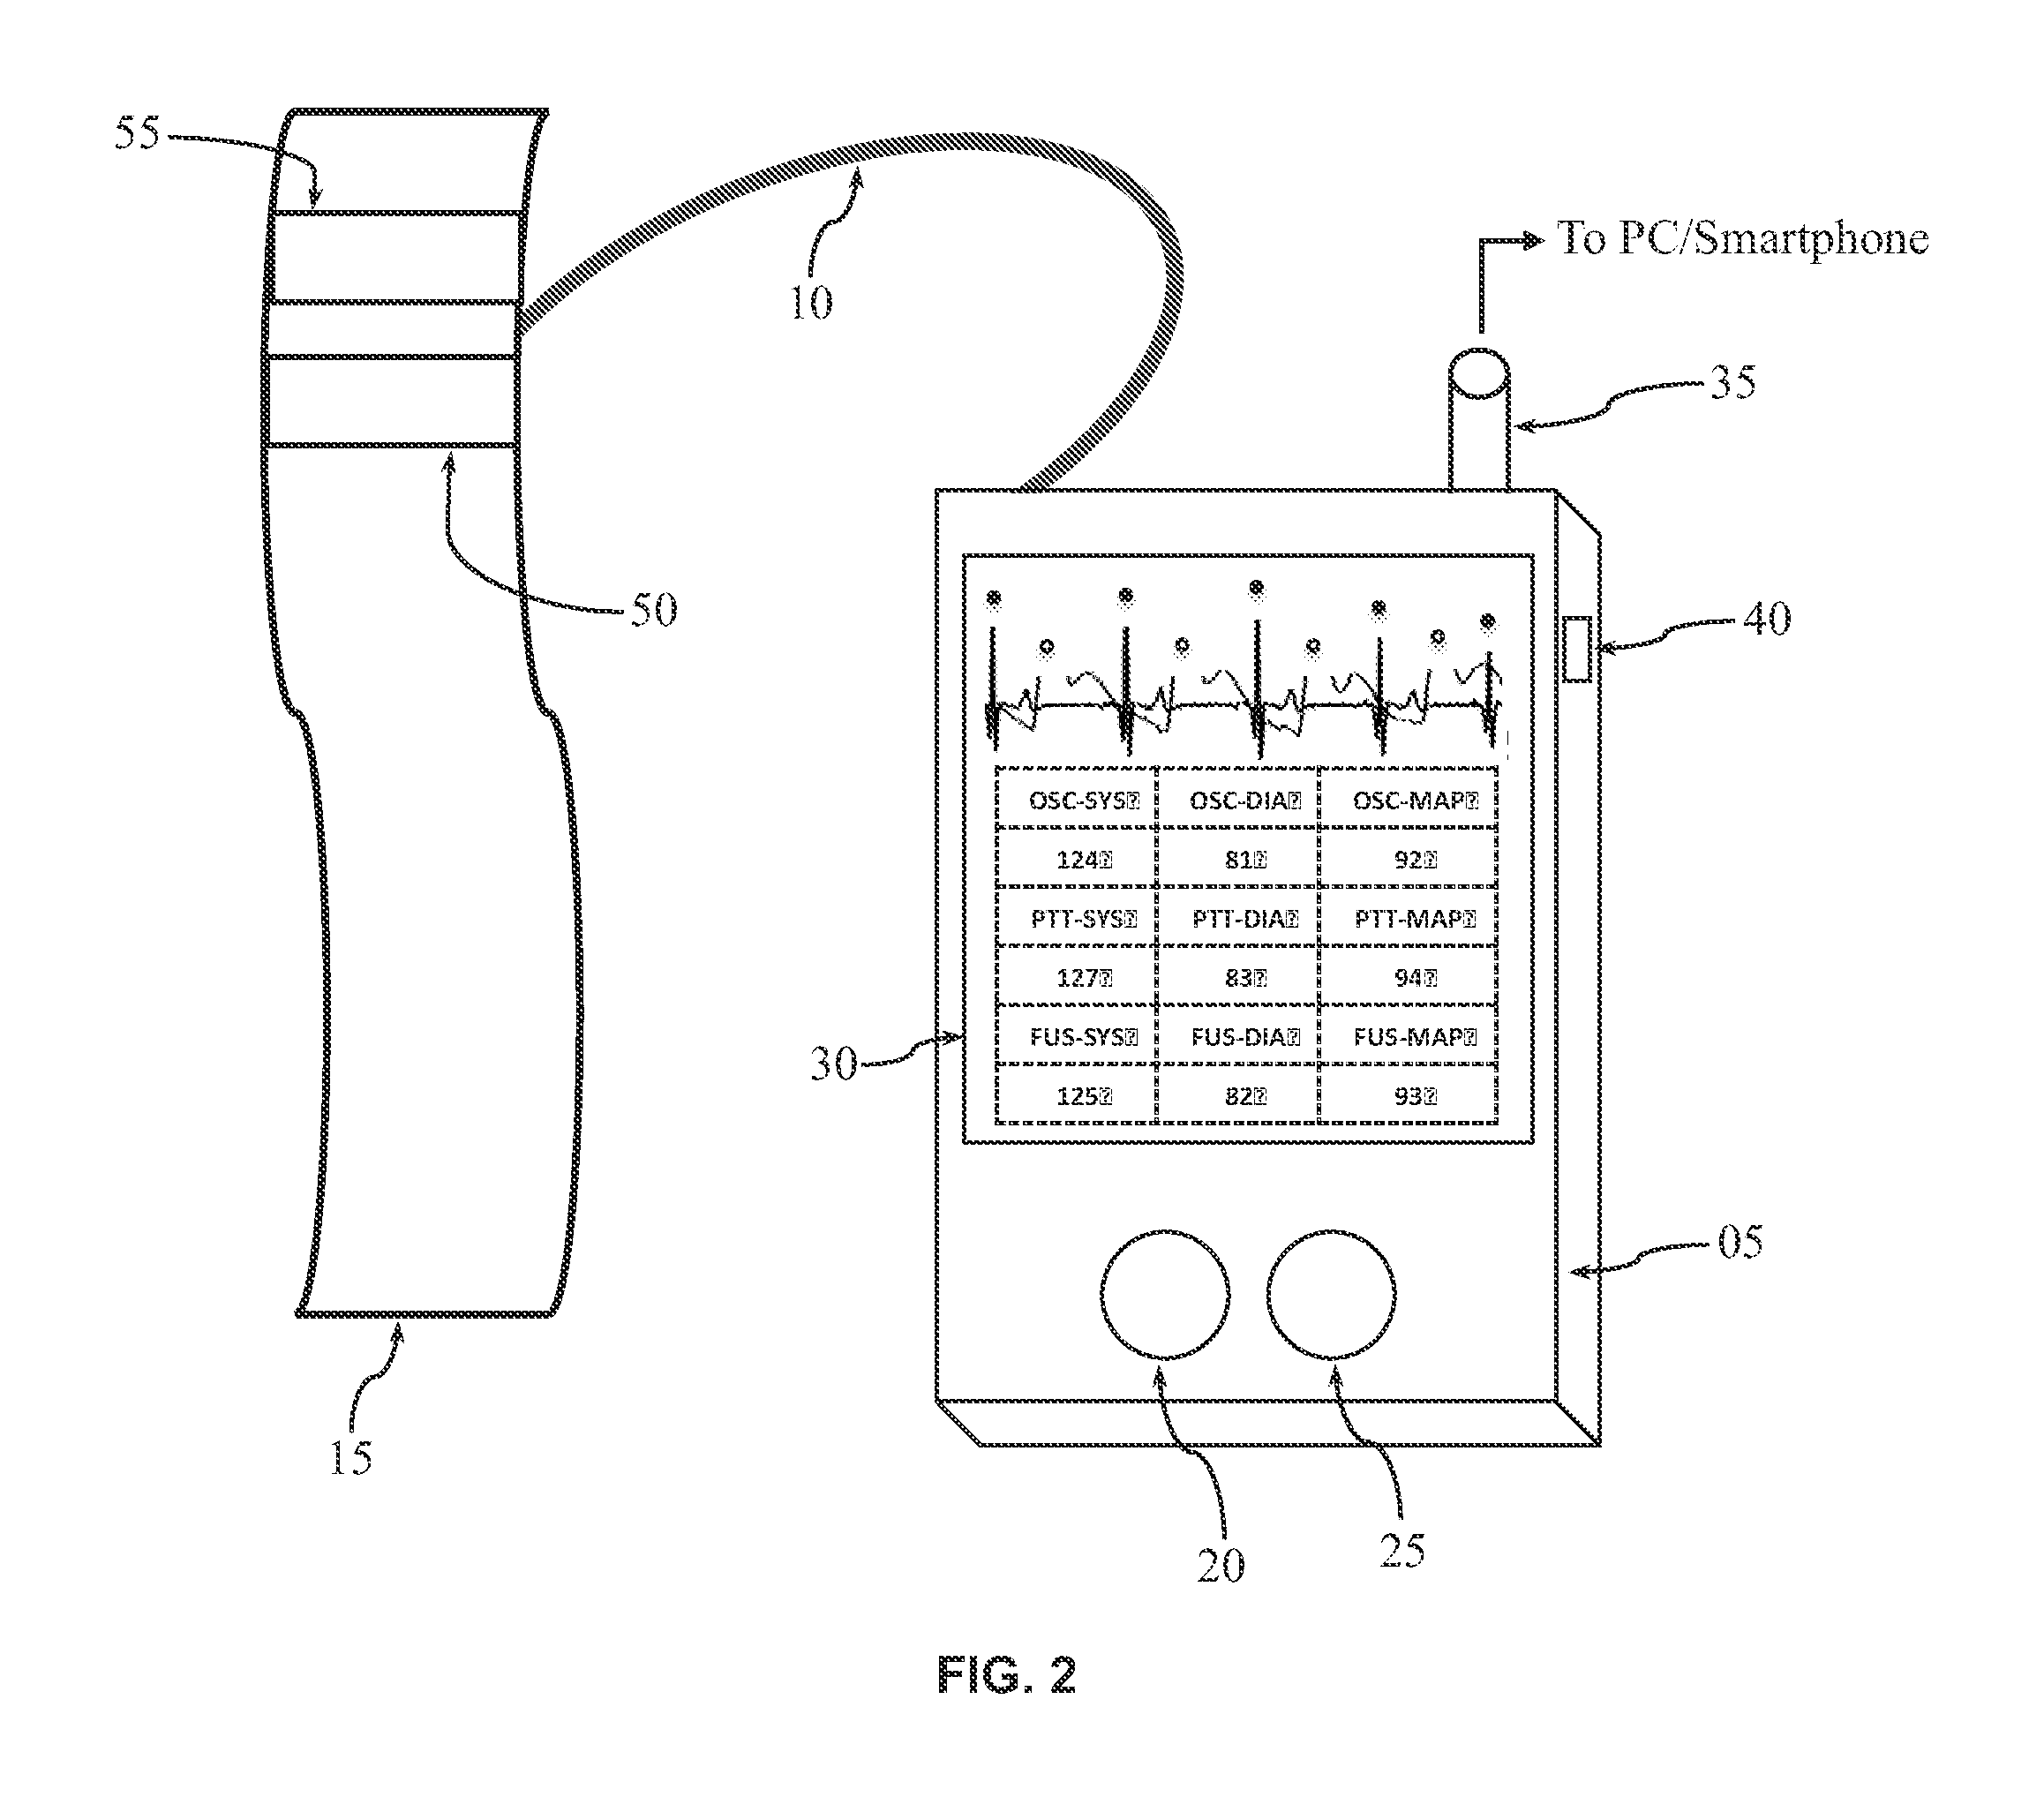 Apparatus and method for electrocardiogram-assisted blood pressure measurement